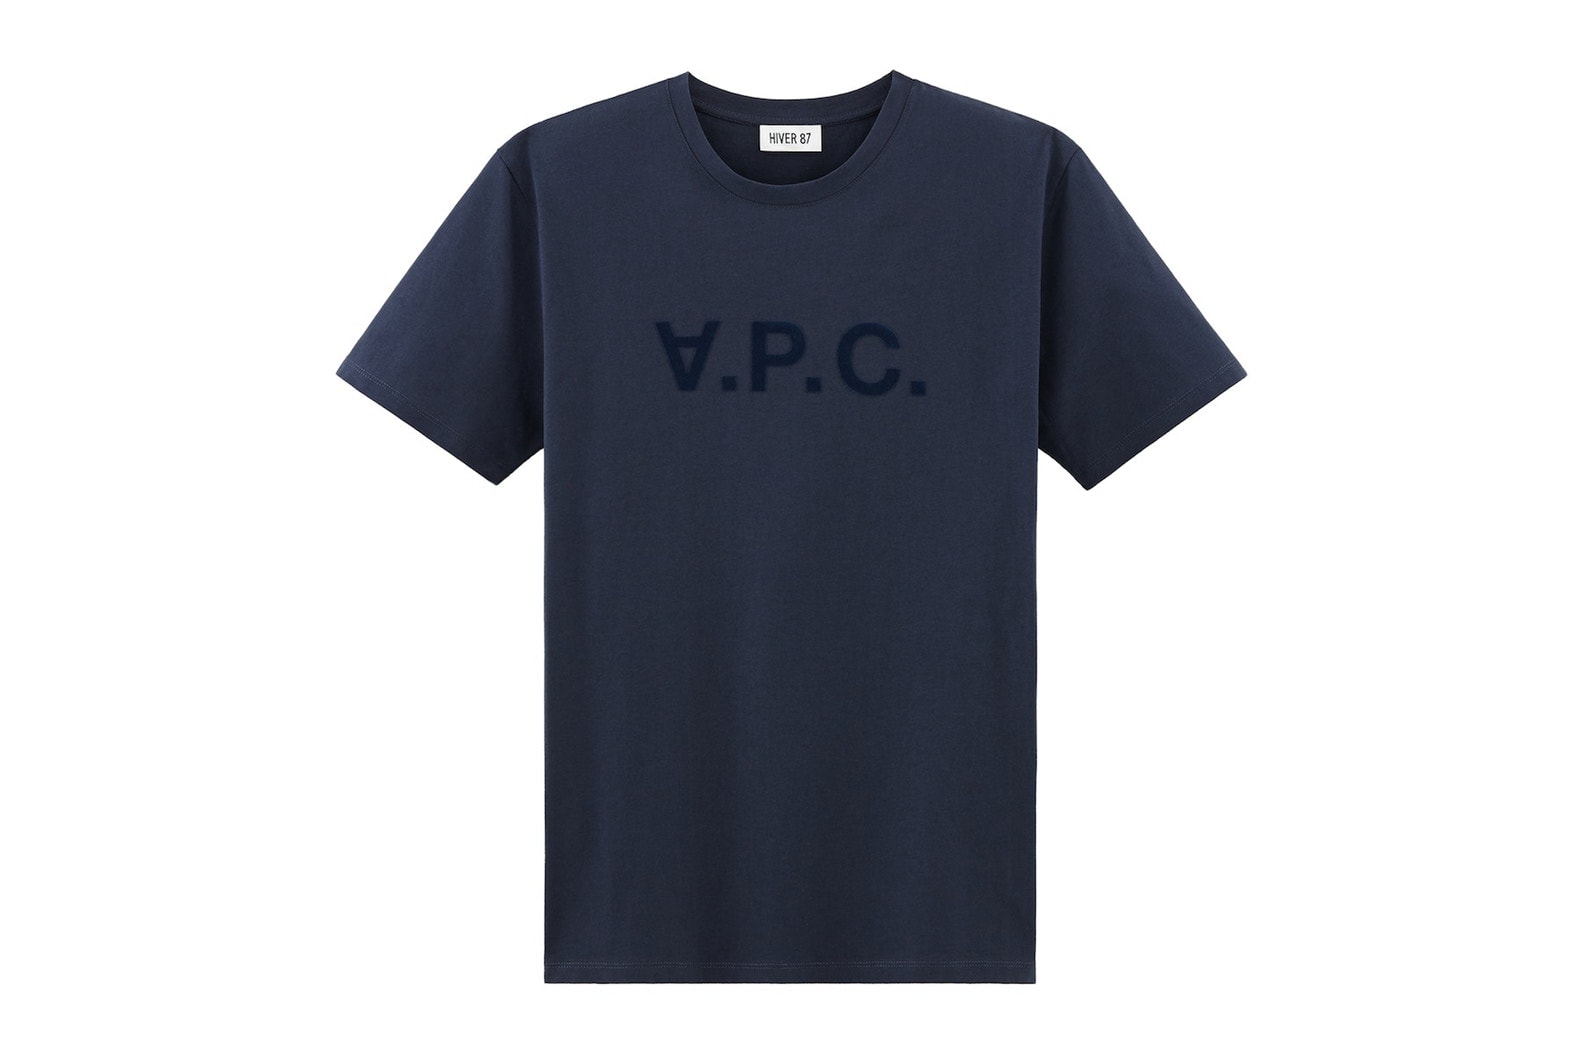 A.P.C. "Hiver 87" Capsule Collection